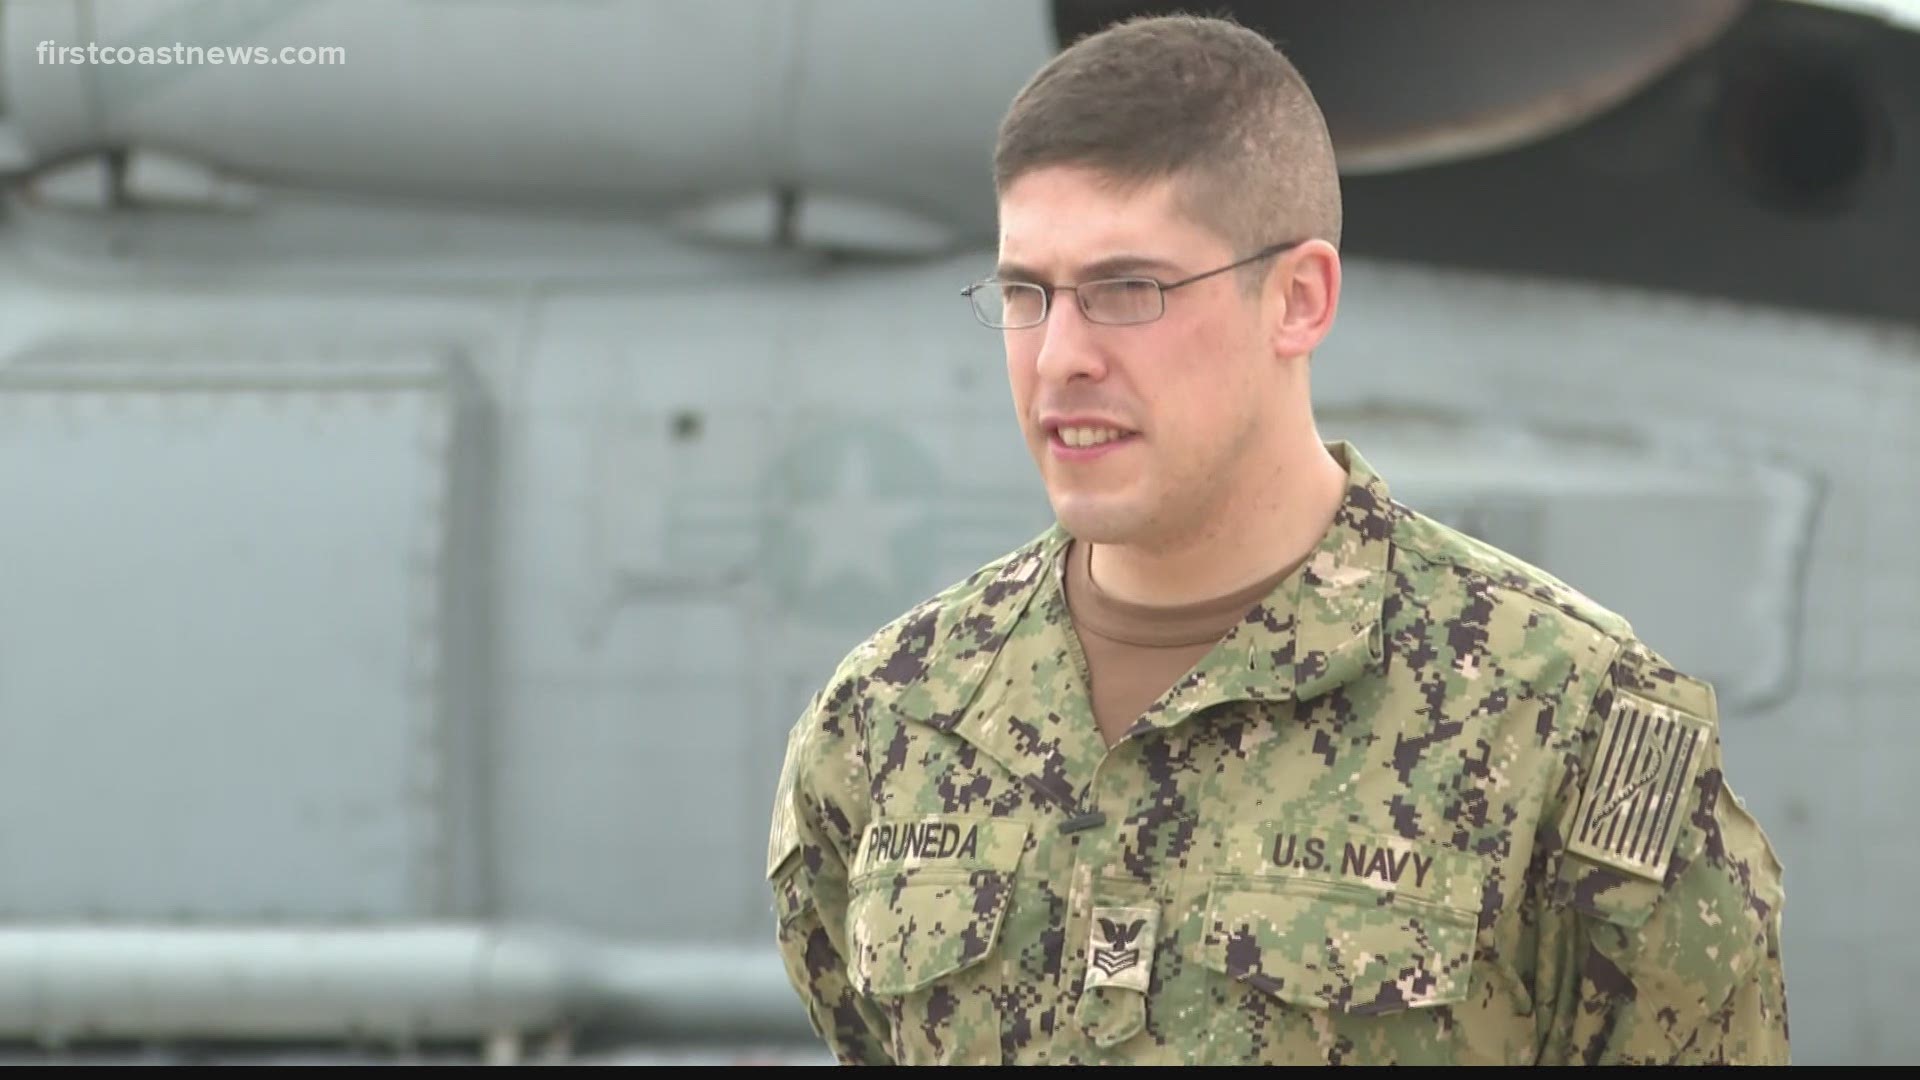 'I hope I didn't fail you': Navy corpsman describes efforts to save Jacksonville teen after shooting